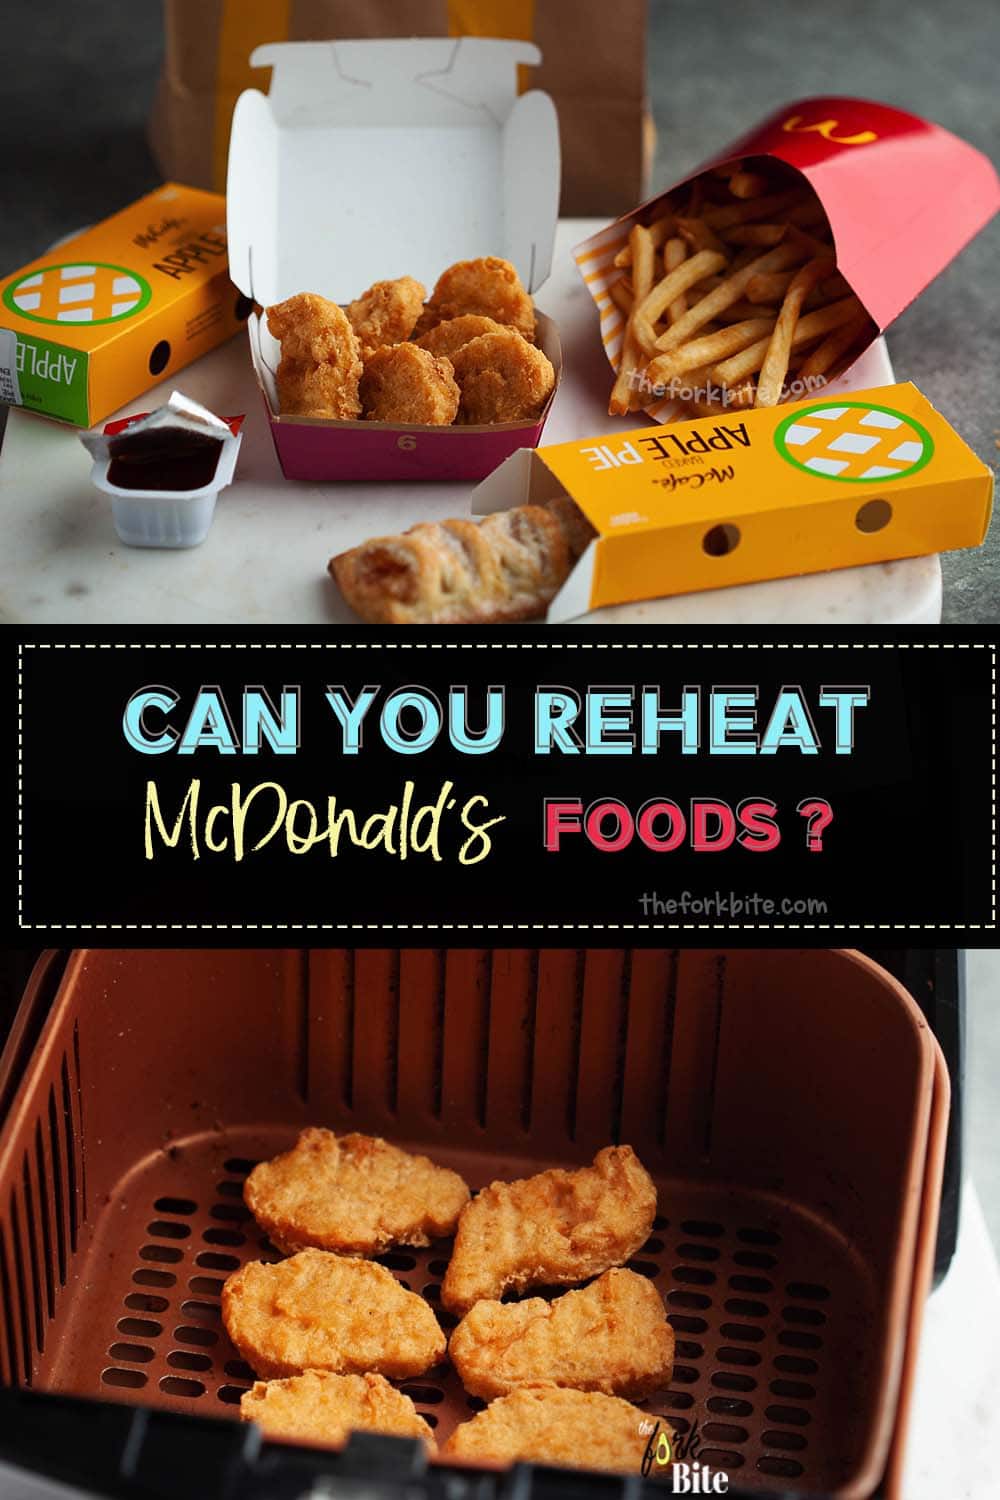 Yes, you can reheat McDonald's fast food. Do it right, and those unique textures and flavors can be enjoyed at your convenience.